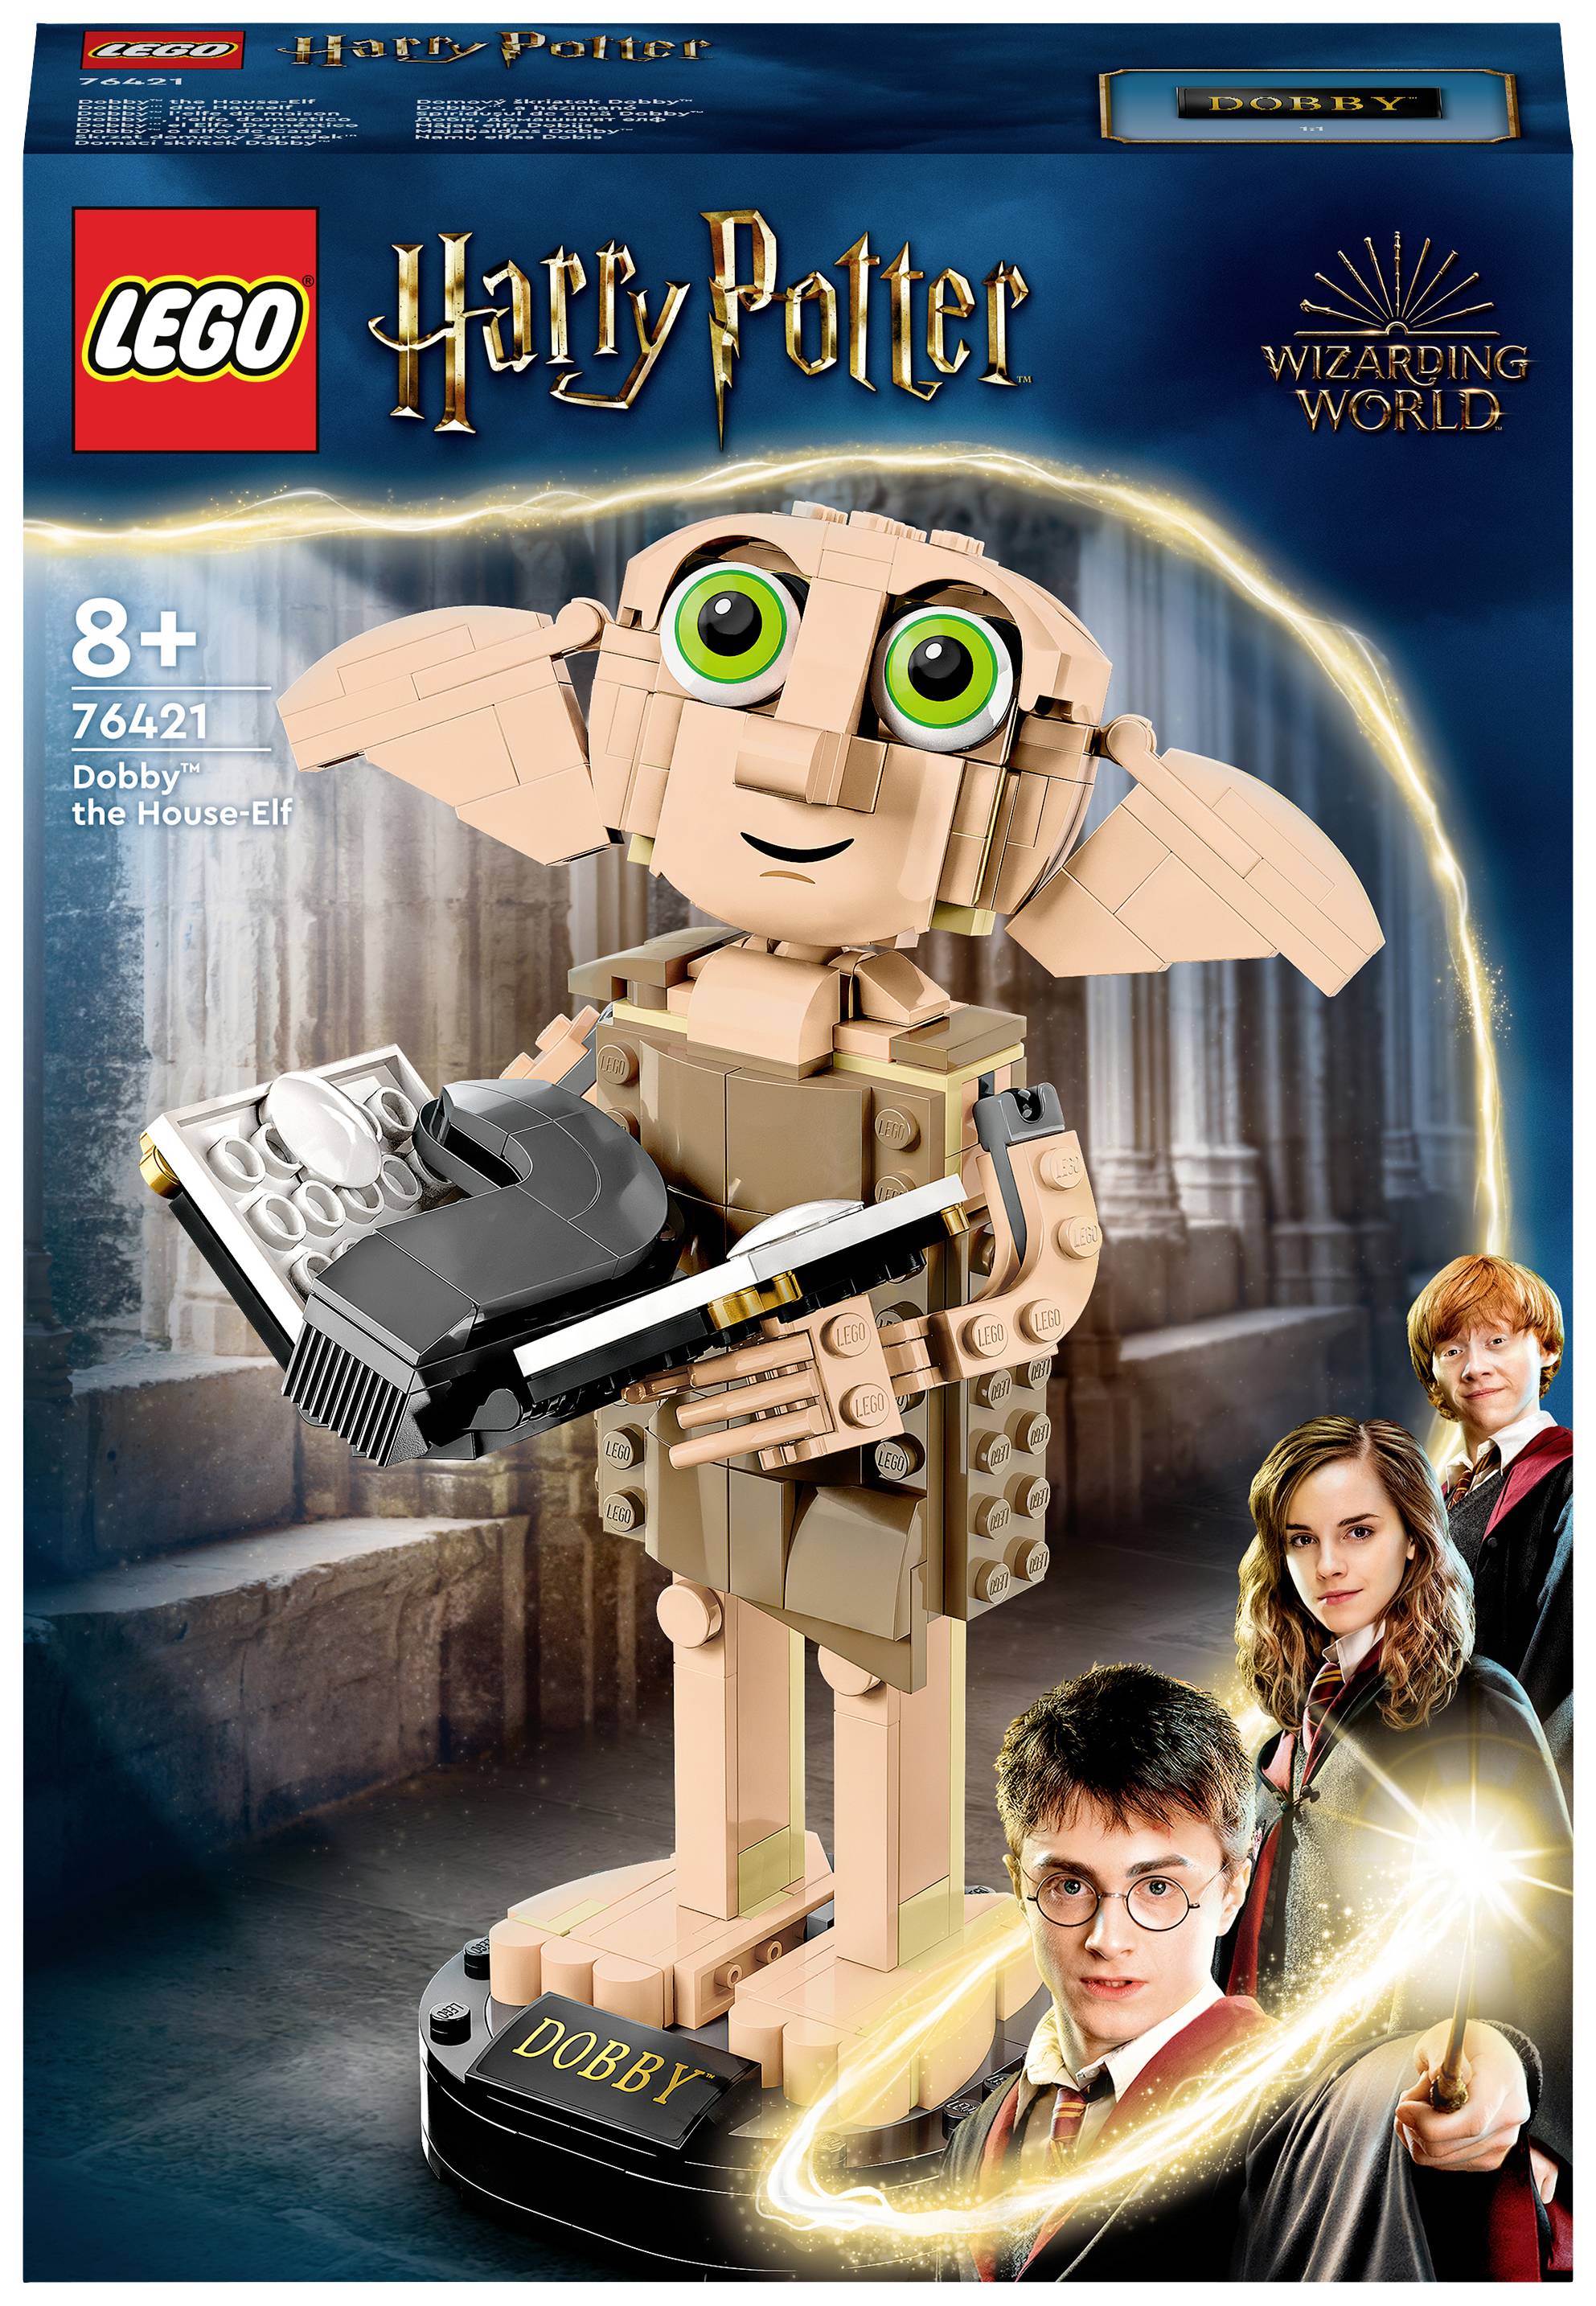 76421 LEGO® HARRY POTTER™ Dobsonian the house elf